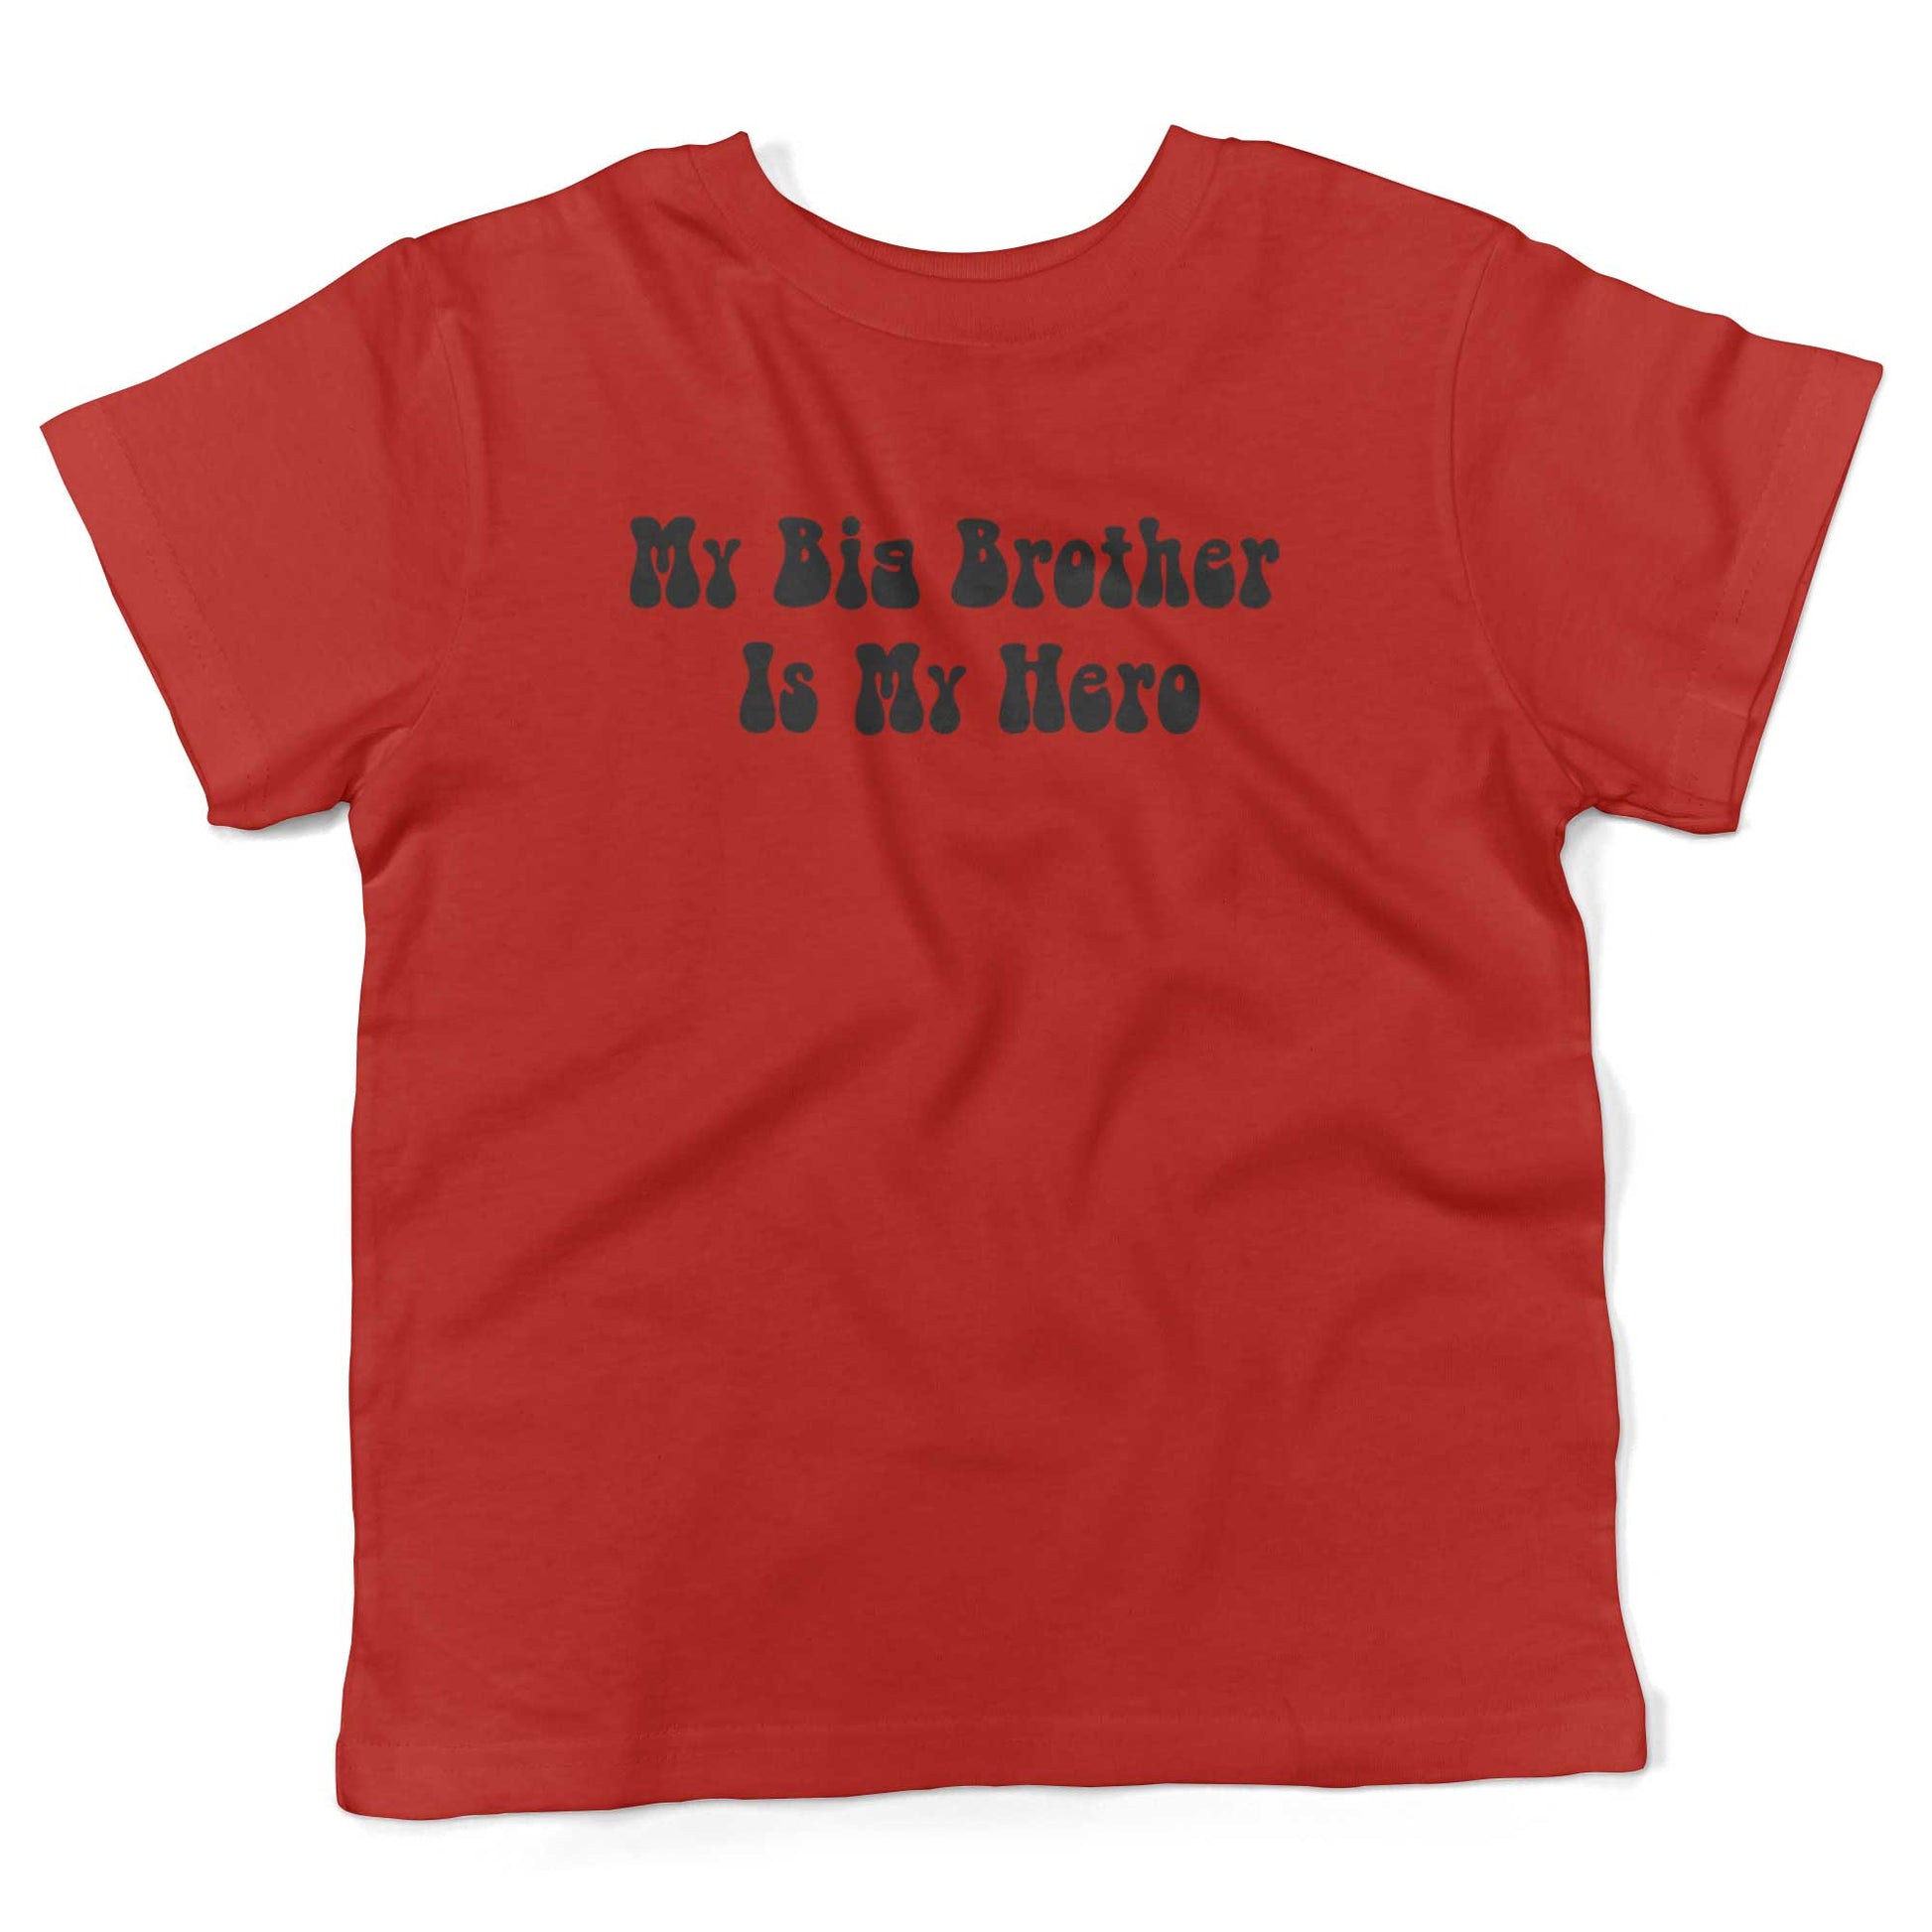 My Big Brother Is My Hero Toddler Shirt-Red-2T